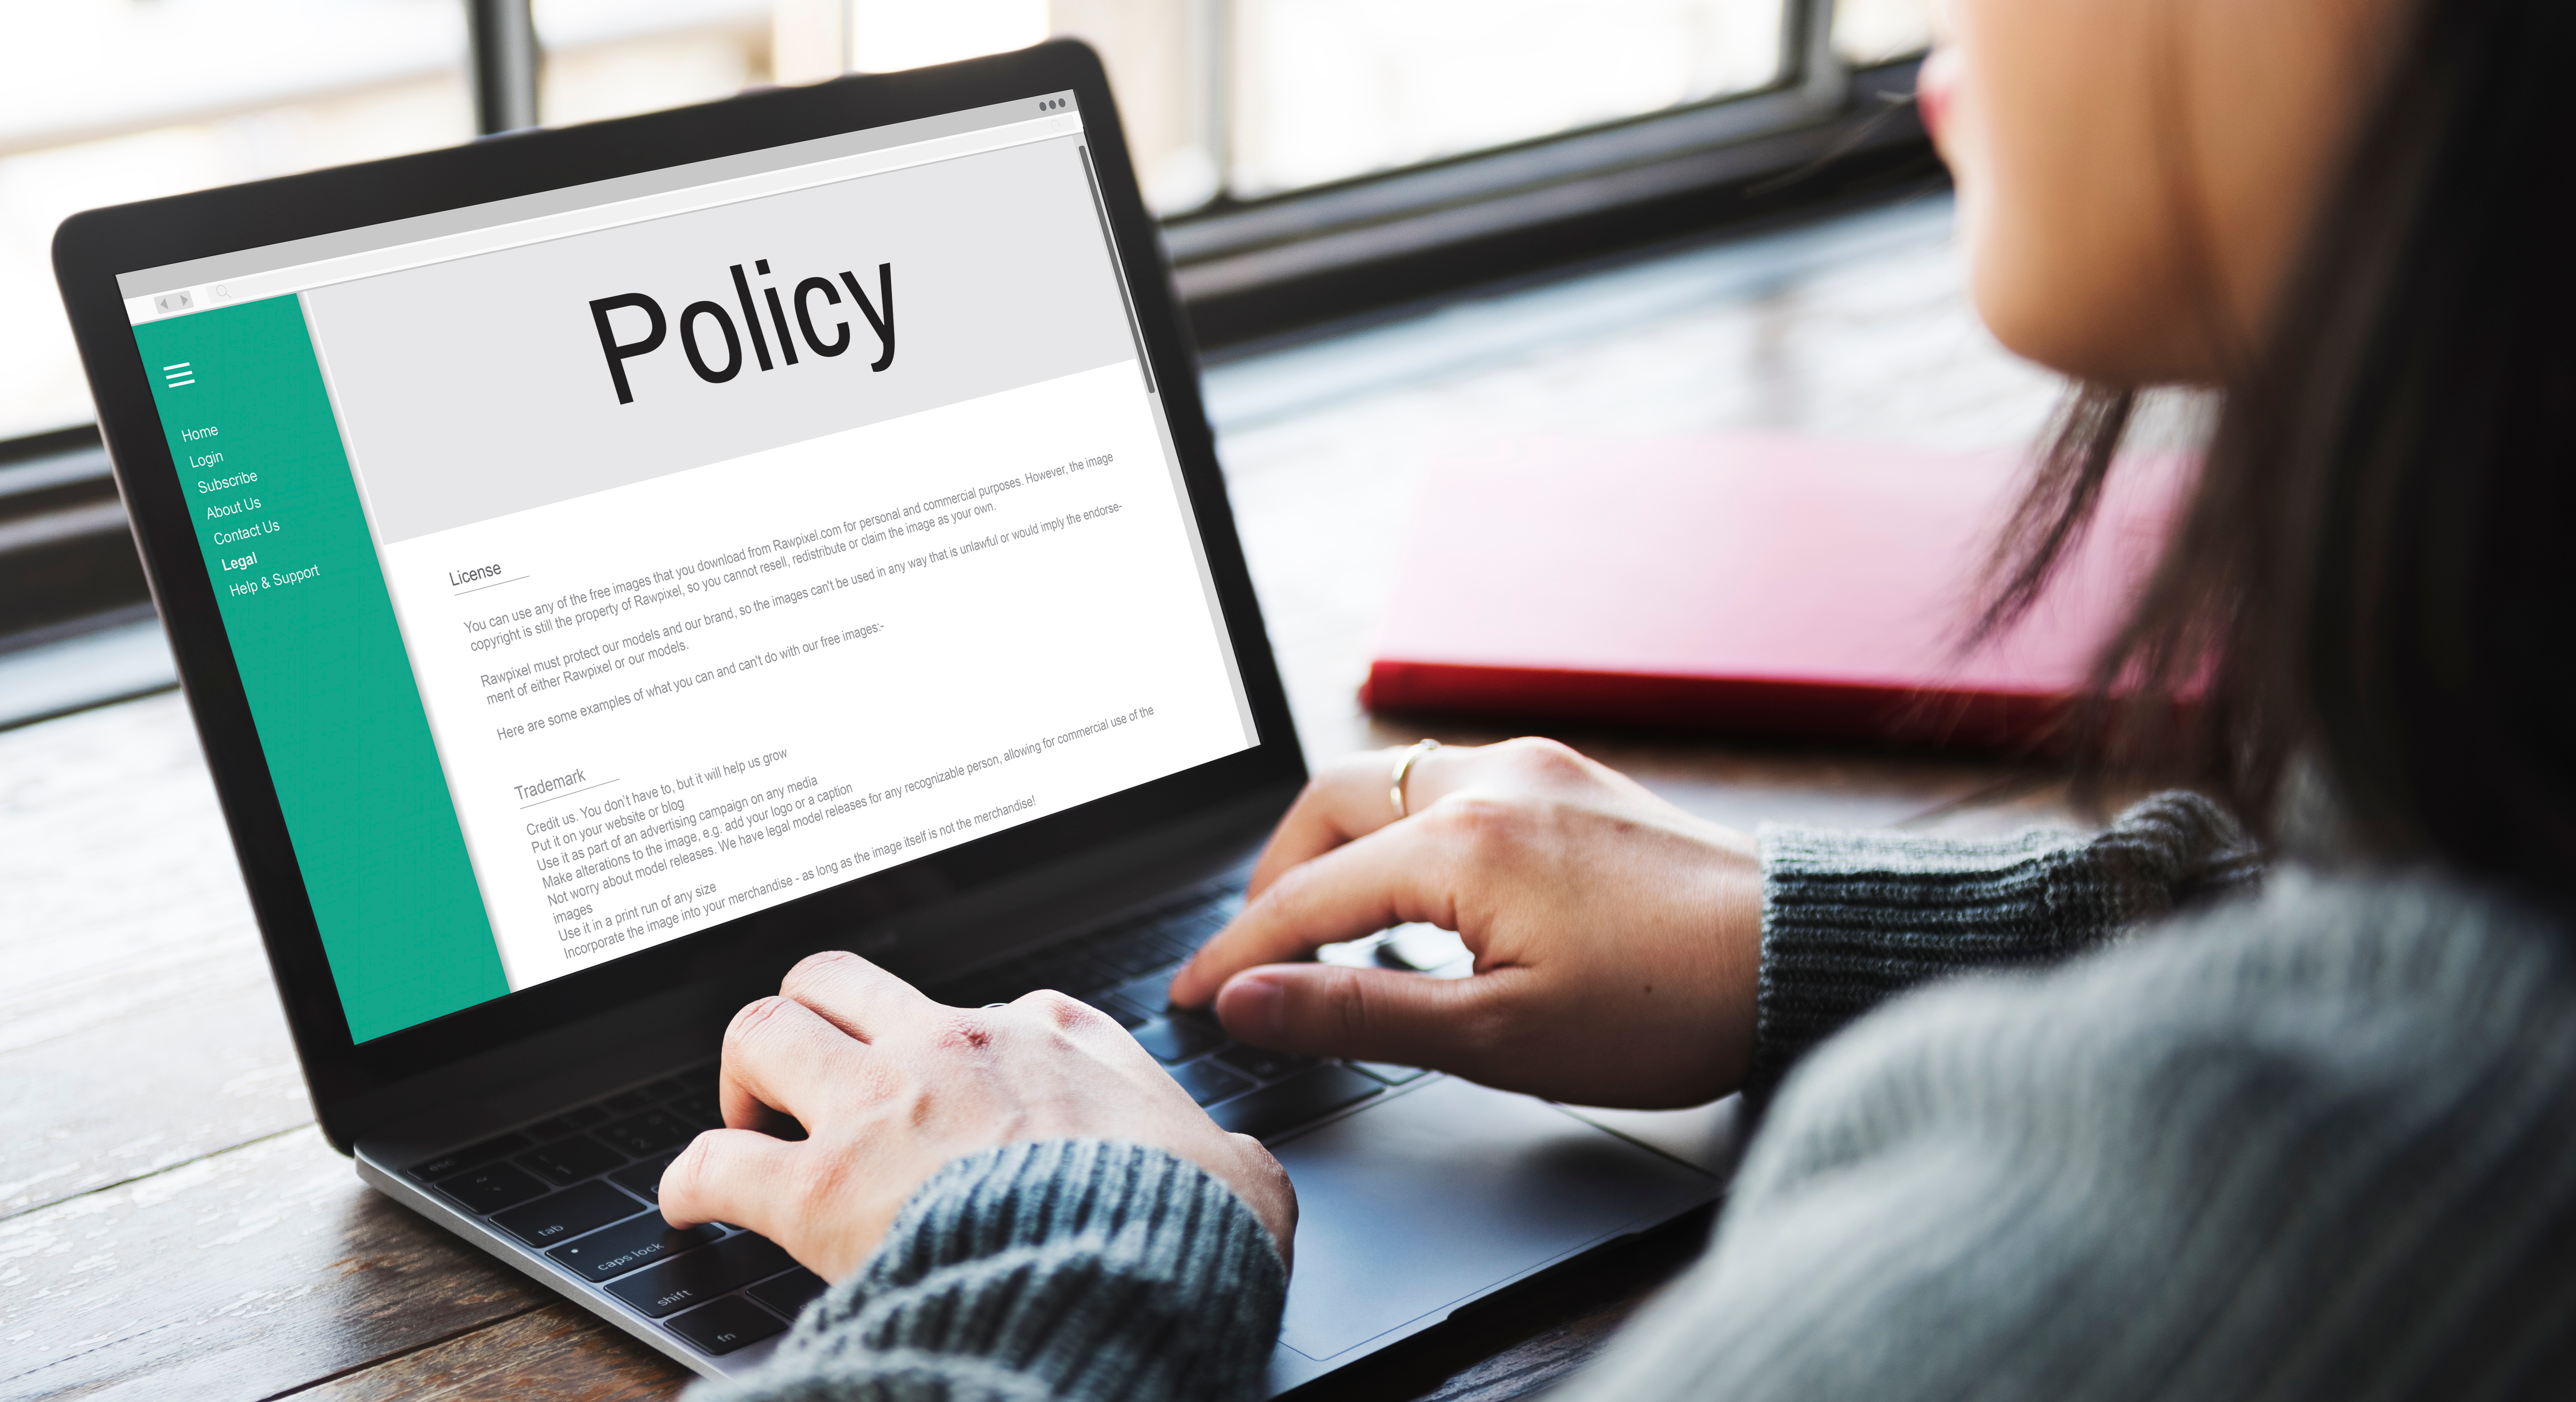 A legal policy image showing detailed intellectual property rights, privacy rules and FTC guidelines